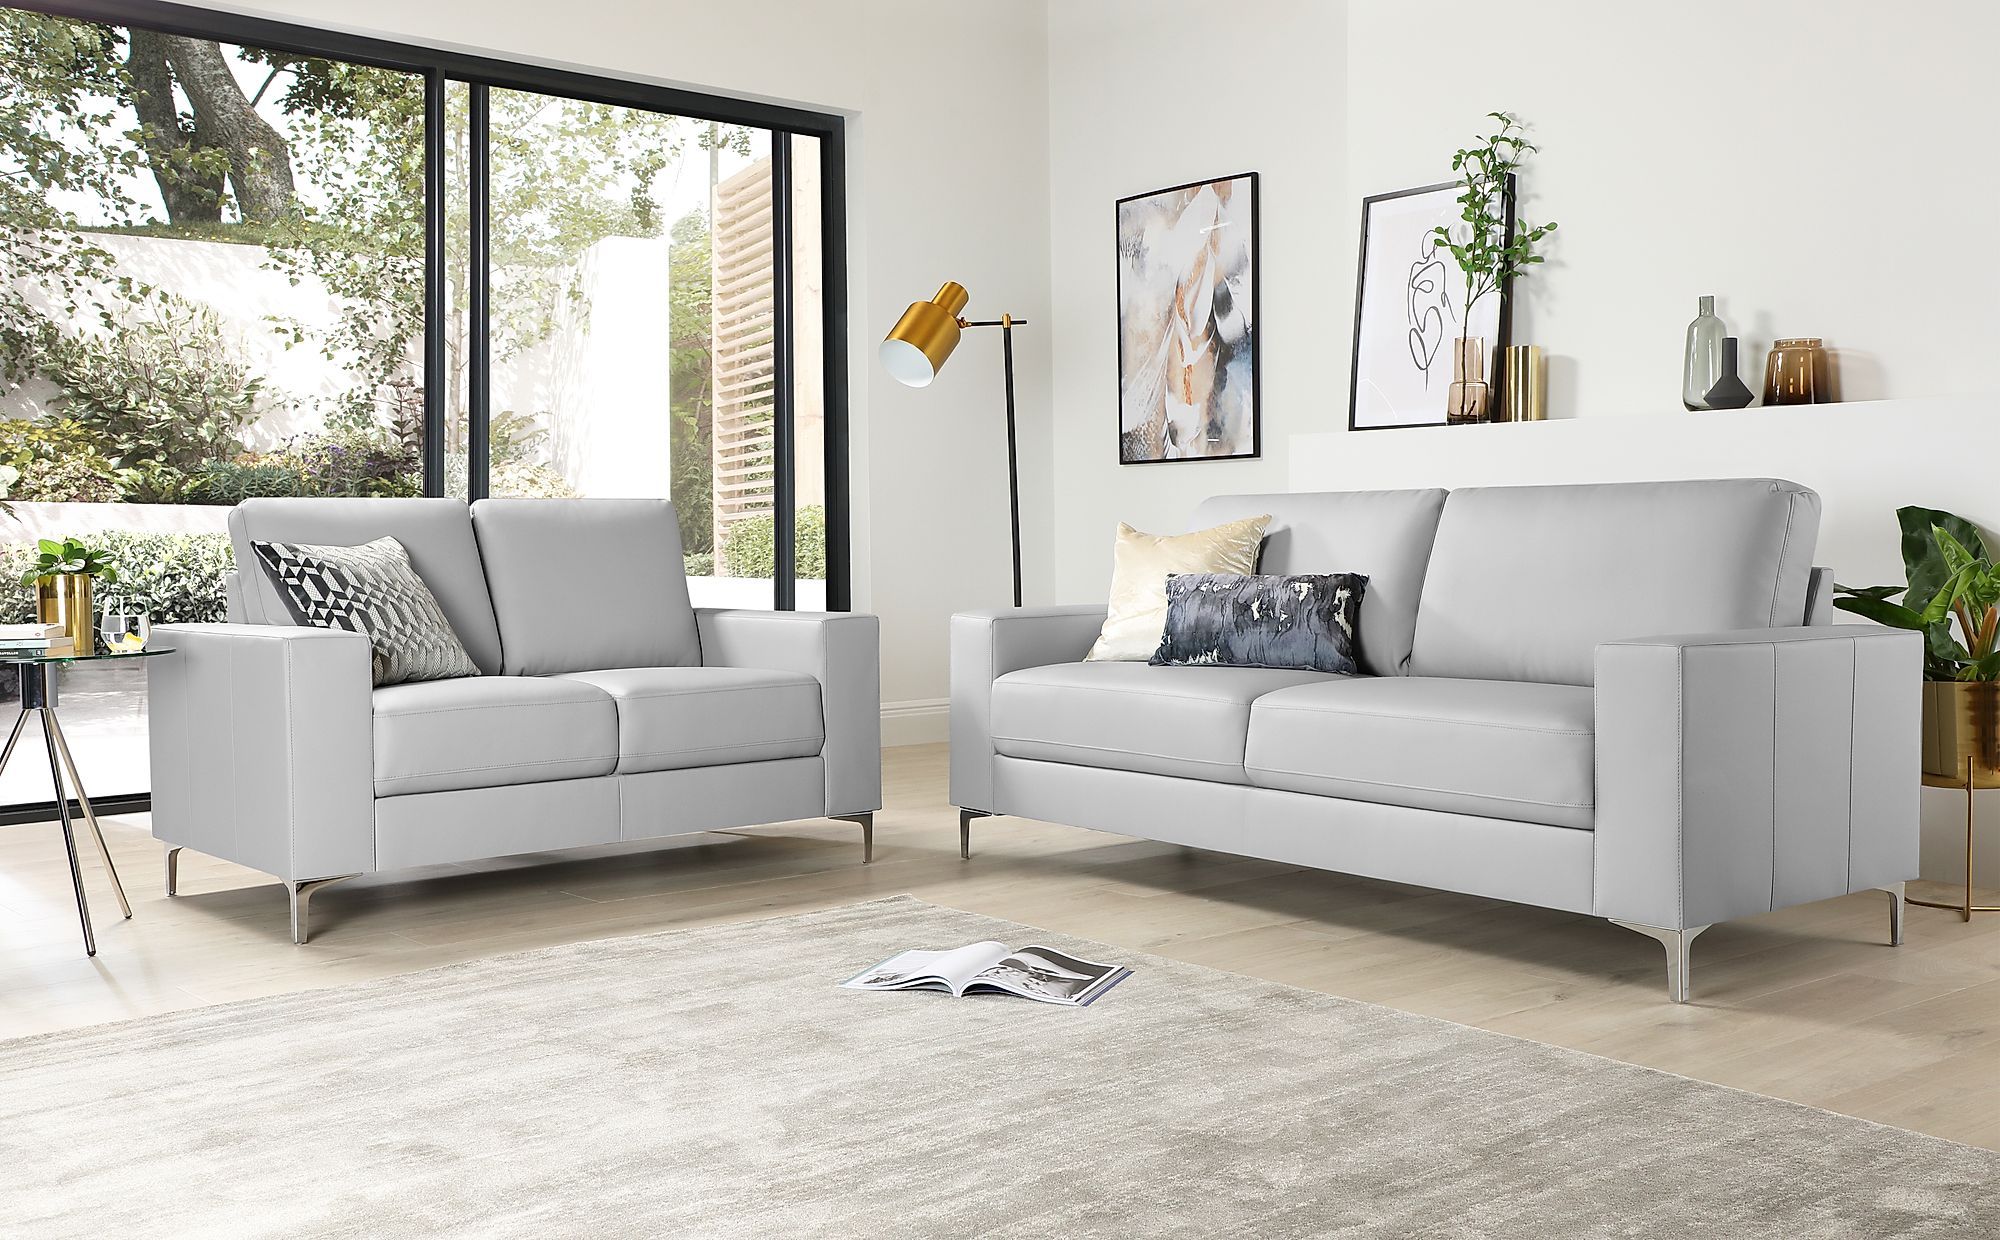 Baltimore Light Grey Leather 3+2 Seater Sofa Set | Furniture Choice Intended For Modern Light Grey Loveseat Sofas (Gallery 7 of 20)